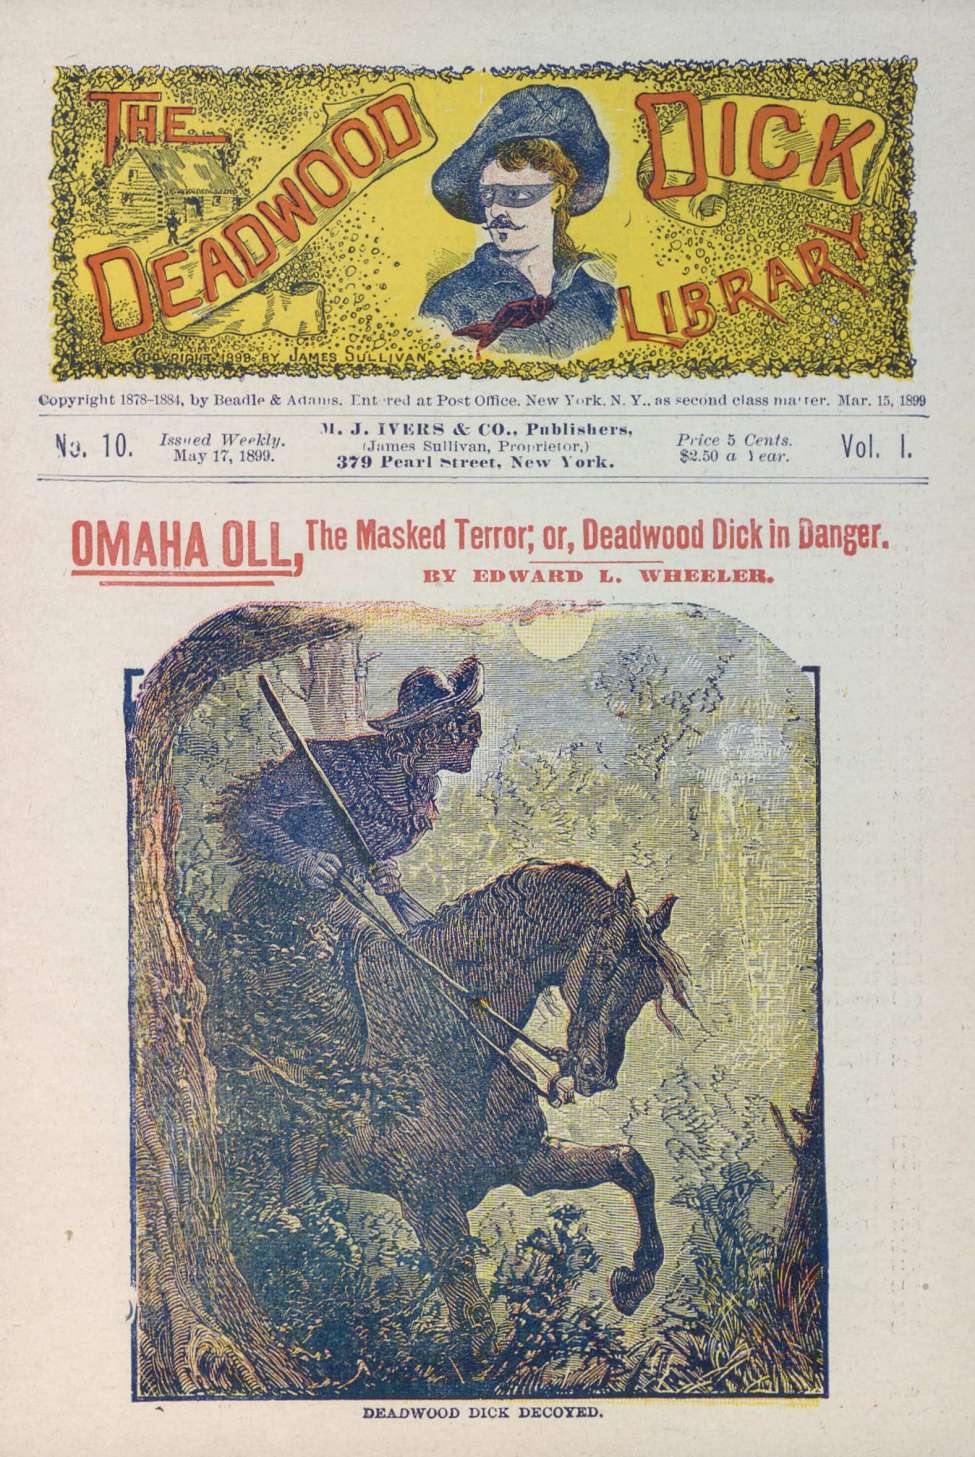 Book Cover For Deadwood Dick Library v1 10 - Omaha Oll, the Masked Terror